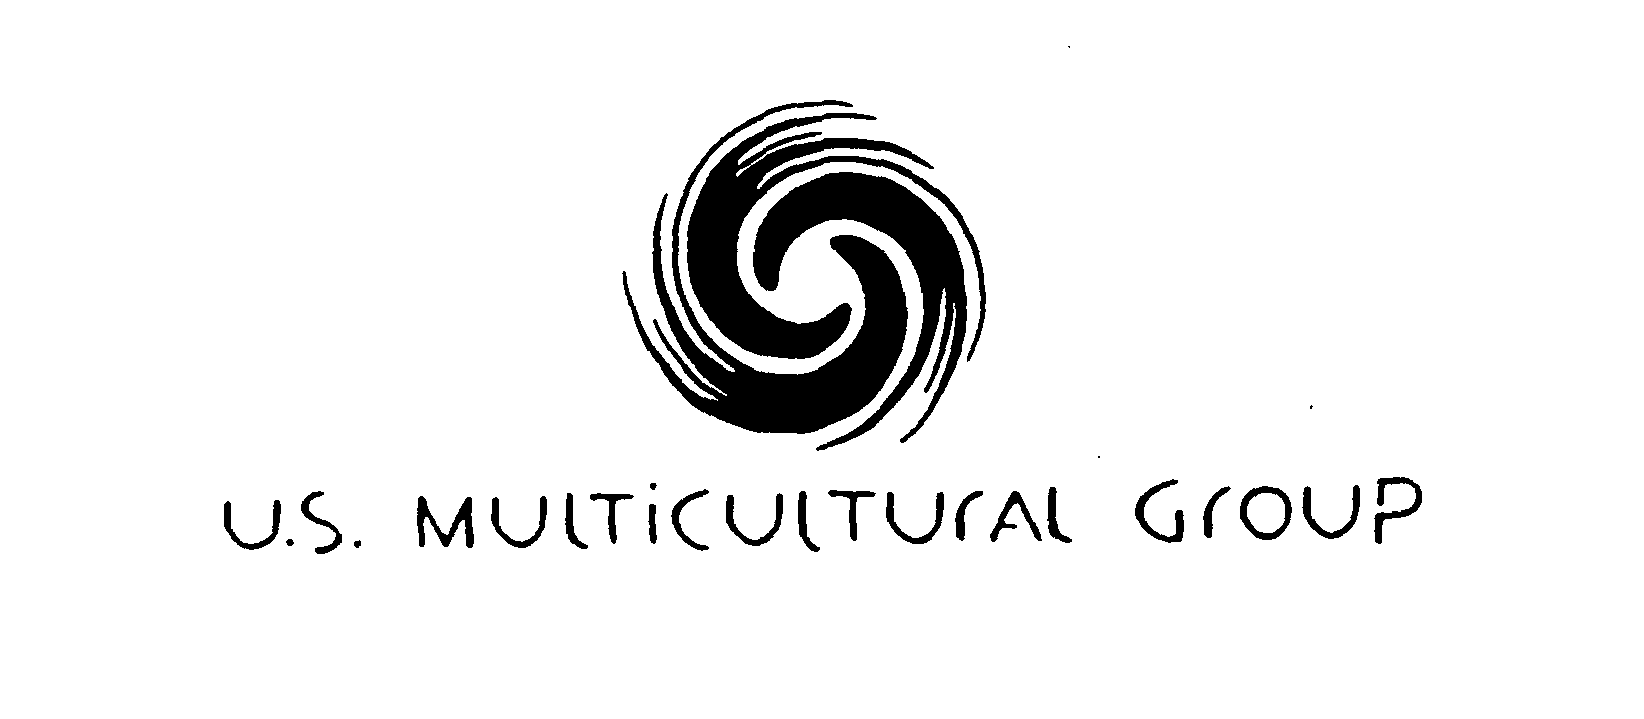  U.S. MULTICULTURAL GROUP